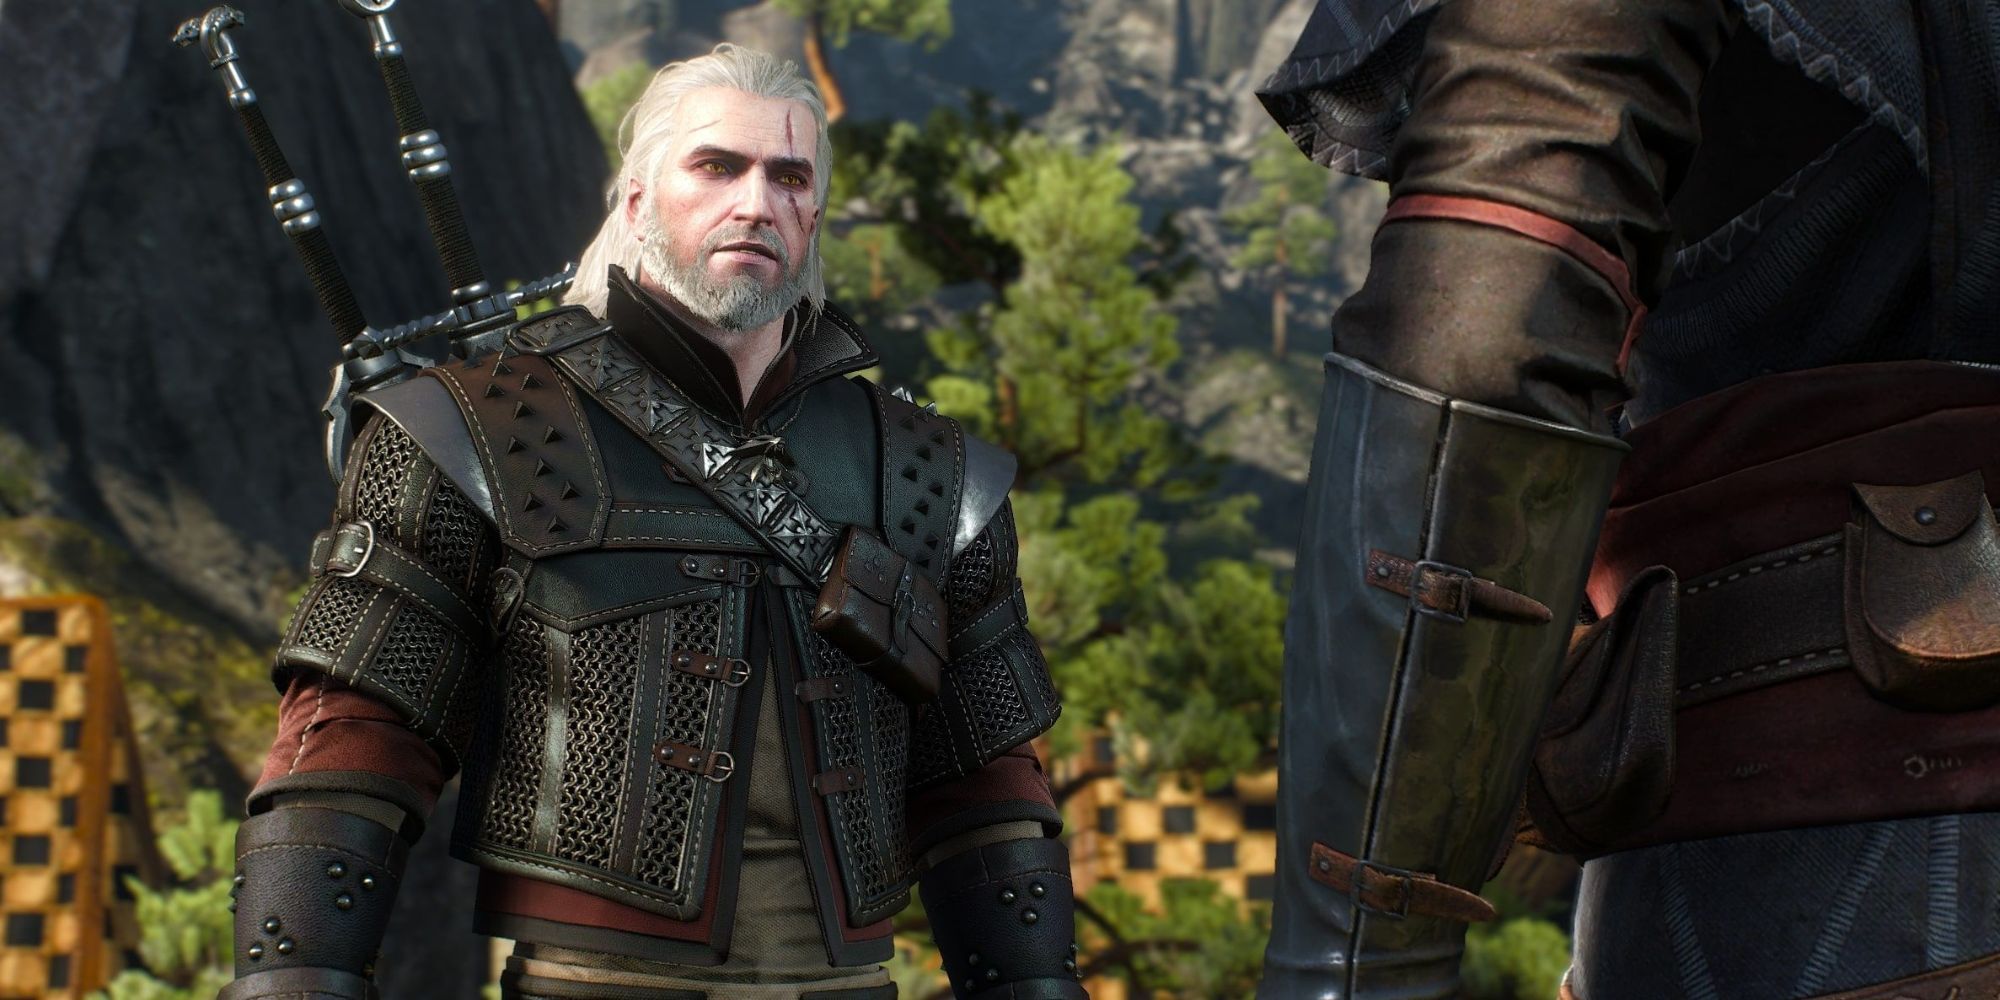 The Witcher 3 showing Geralt speaking to someone out of shot